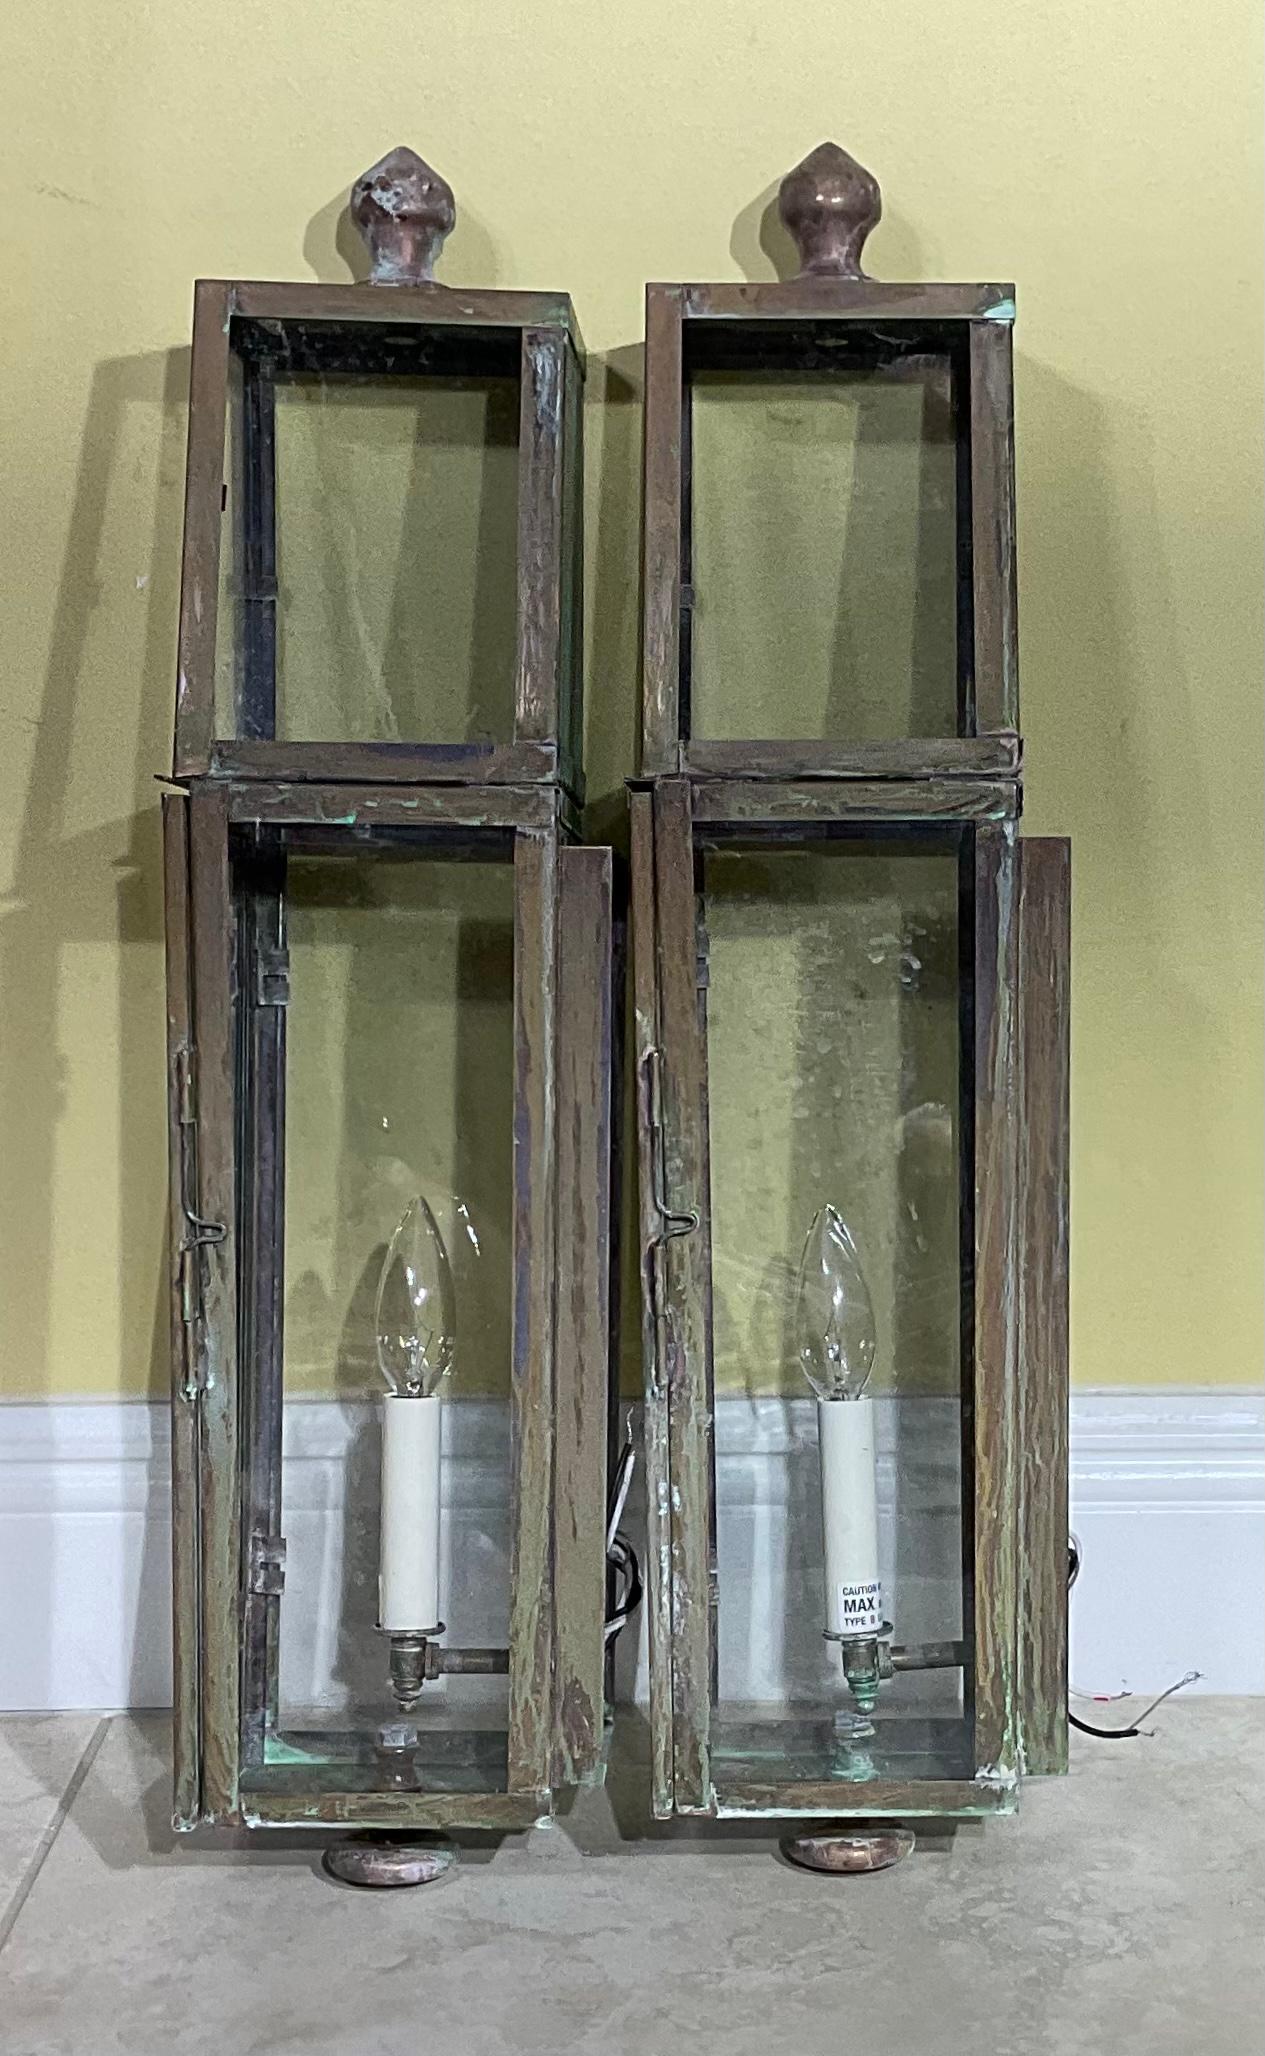 Pair of wall lantern or wall sconces, made of solid copper and brass ,beautiful patina , decorative top and bottom , one 60/watt lights each lantern,
Suitable for wet locations, UL approve, up to US code.
Great looking wall lanterns for any